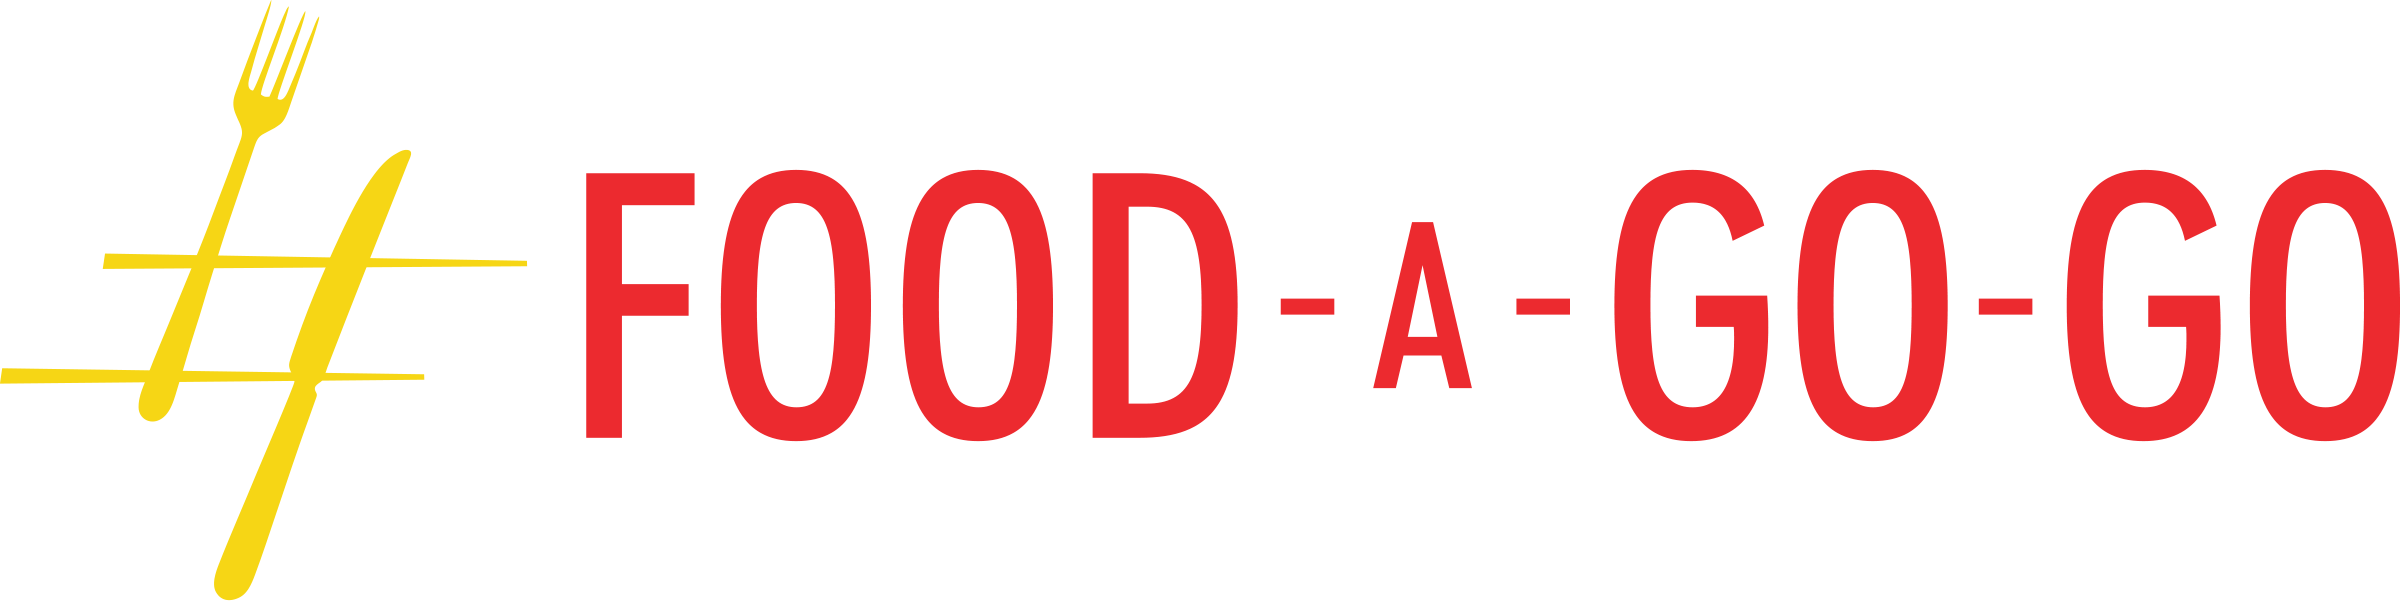 Go Food Logo - Food-A-Go-Go | Support for Hawaii restaurants in times of ...